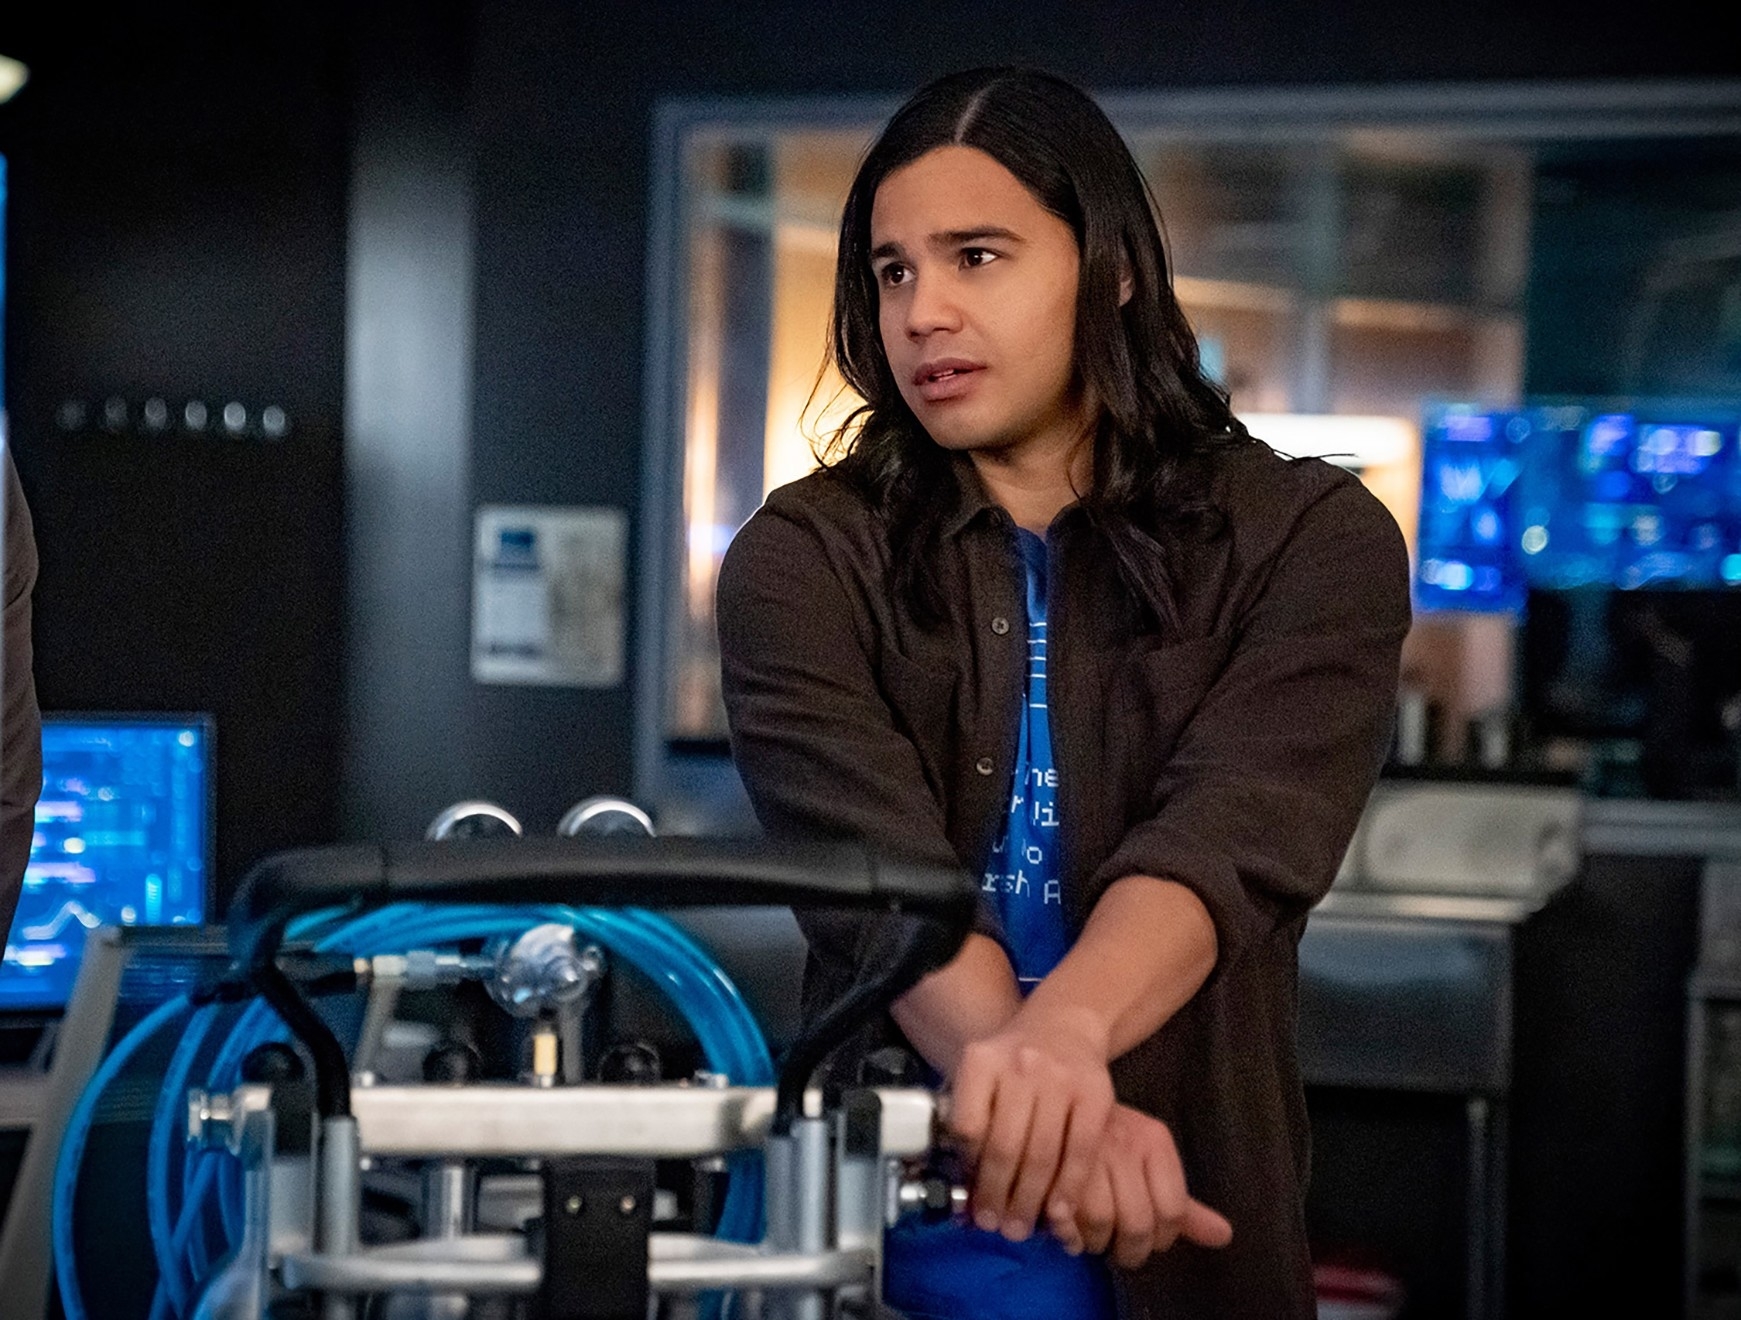 Character Cisco Ramon from TV series in a lab with tech equipment, looking pensive